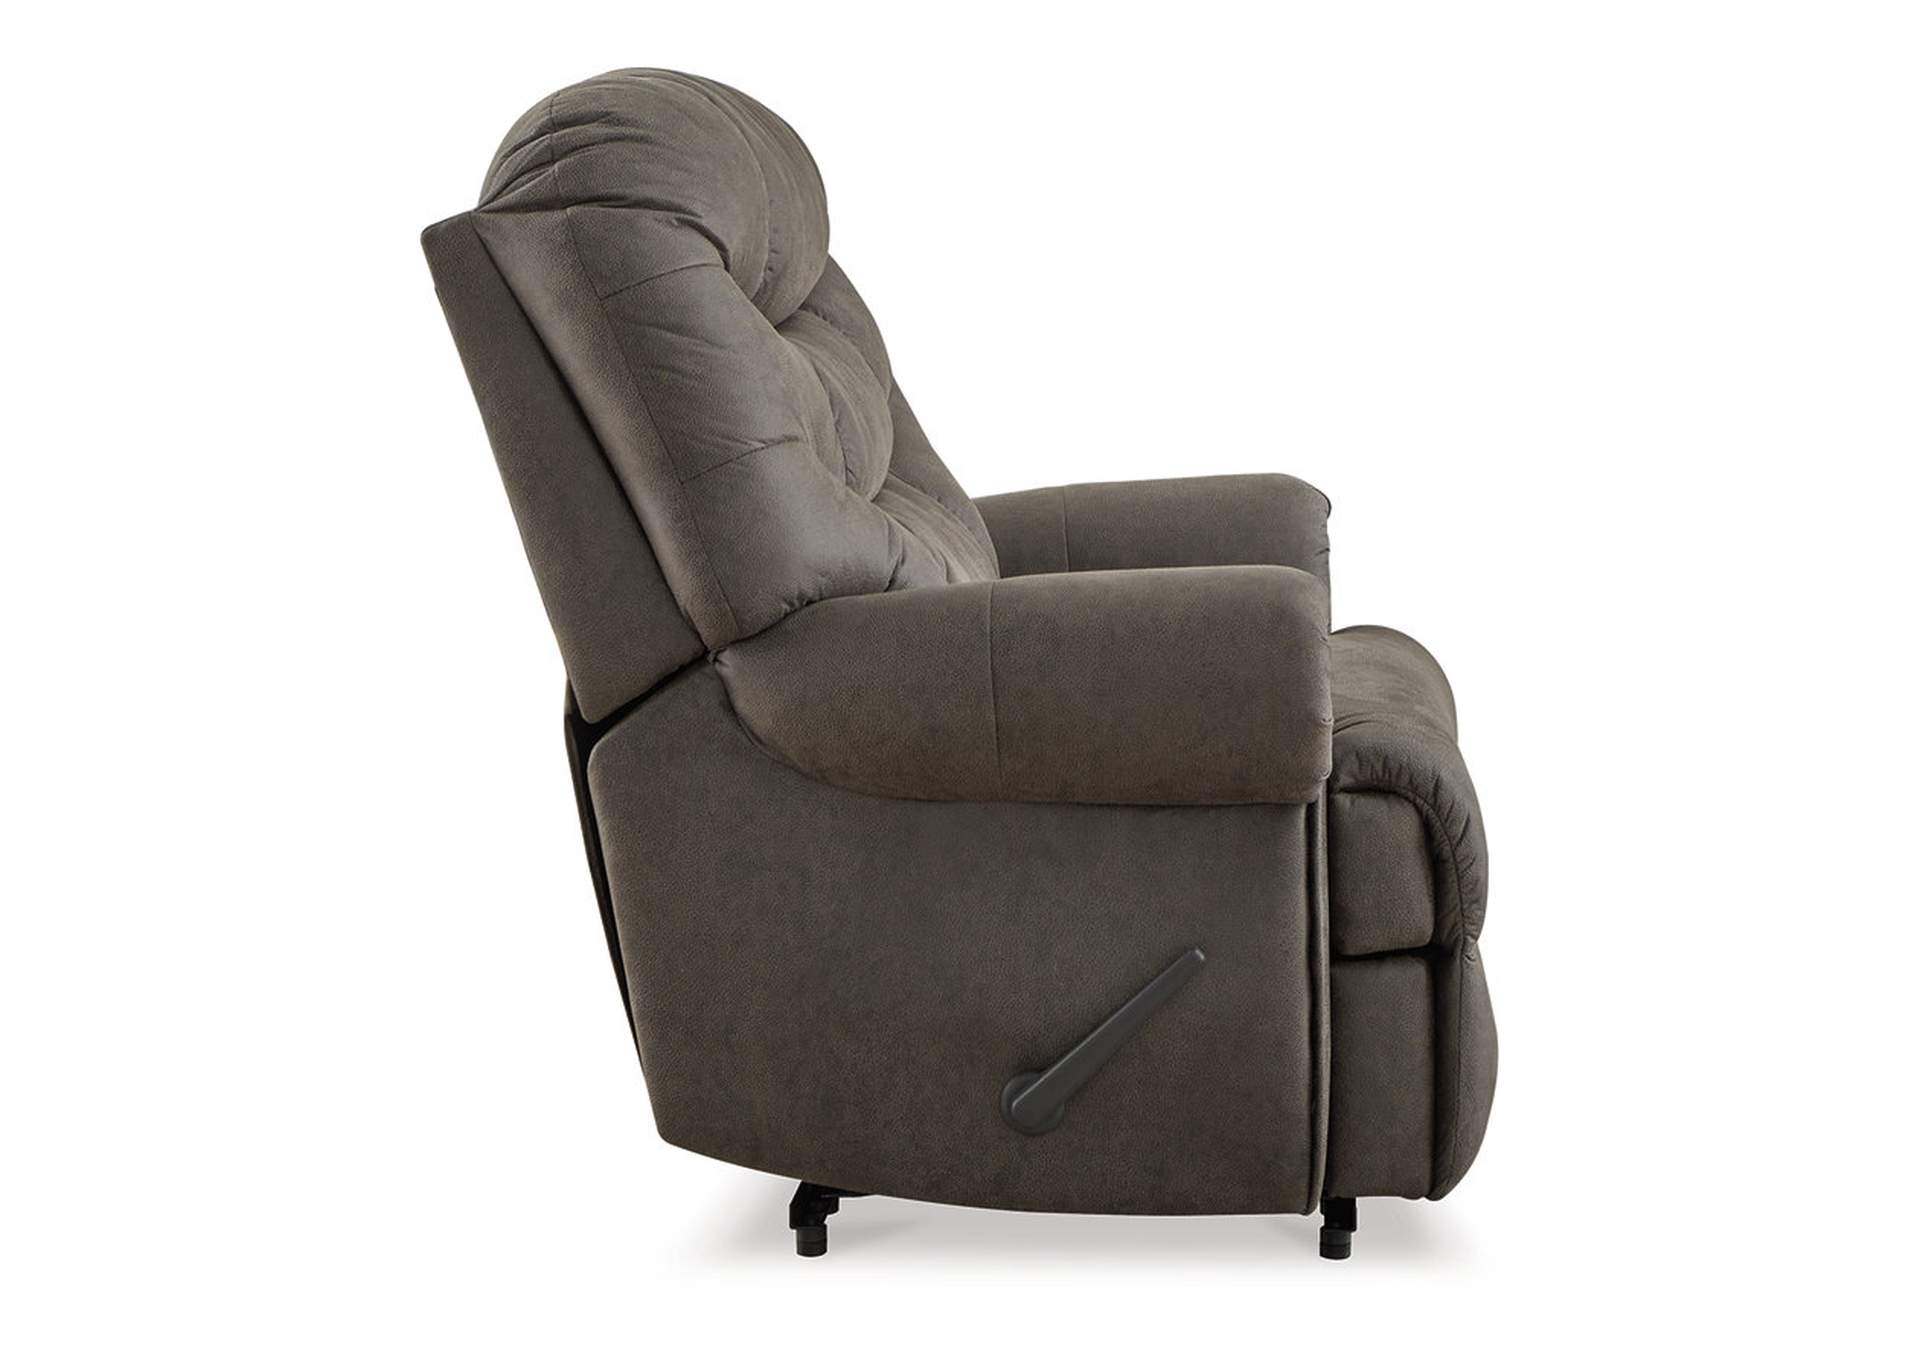 Camera Time Recliner,Signature Design By Ashley